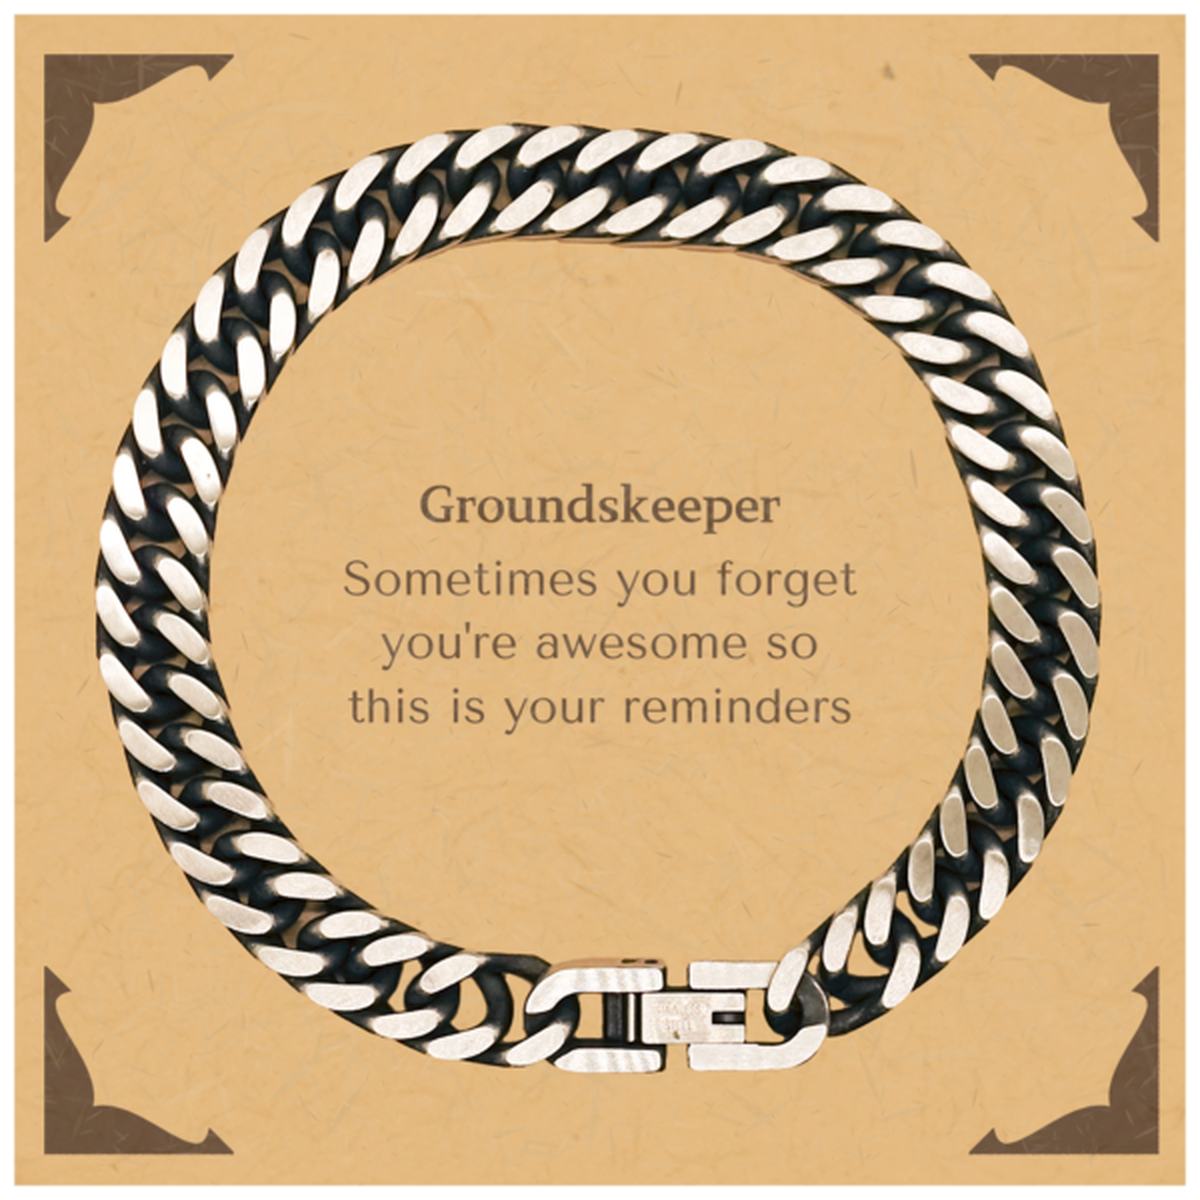 Sentimental Groundskeeper Cuban Link Chain Bracelet, Groundskeeper Sometimes you forget you're awesome so this is your reminders, Graduation Christmas Birthday Gifts for Groundskeeper, Men, Women, Coworkers